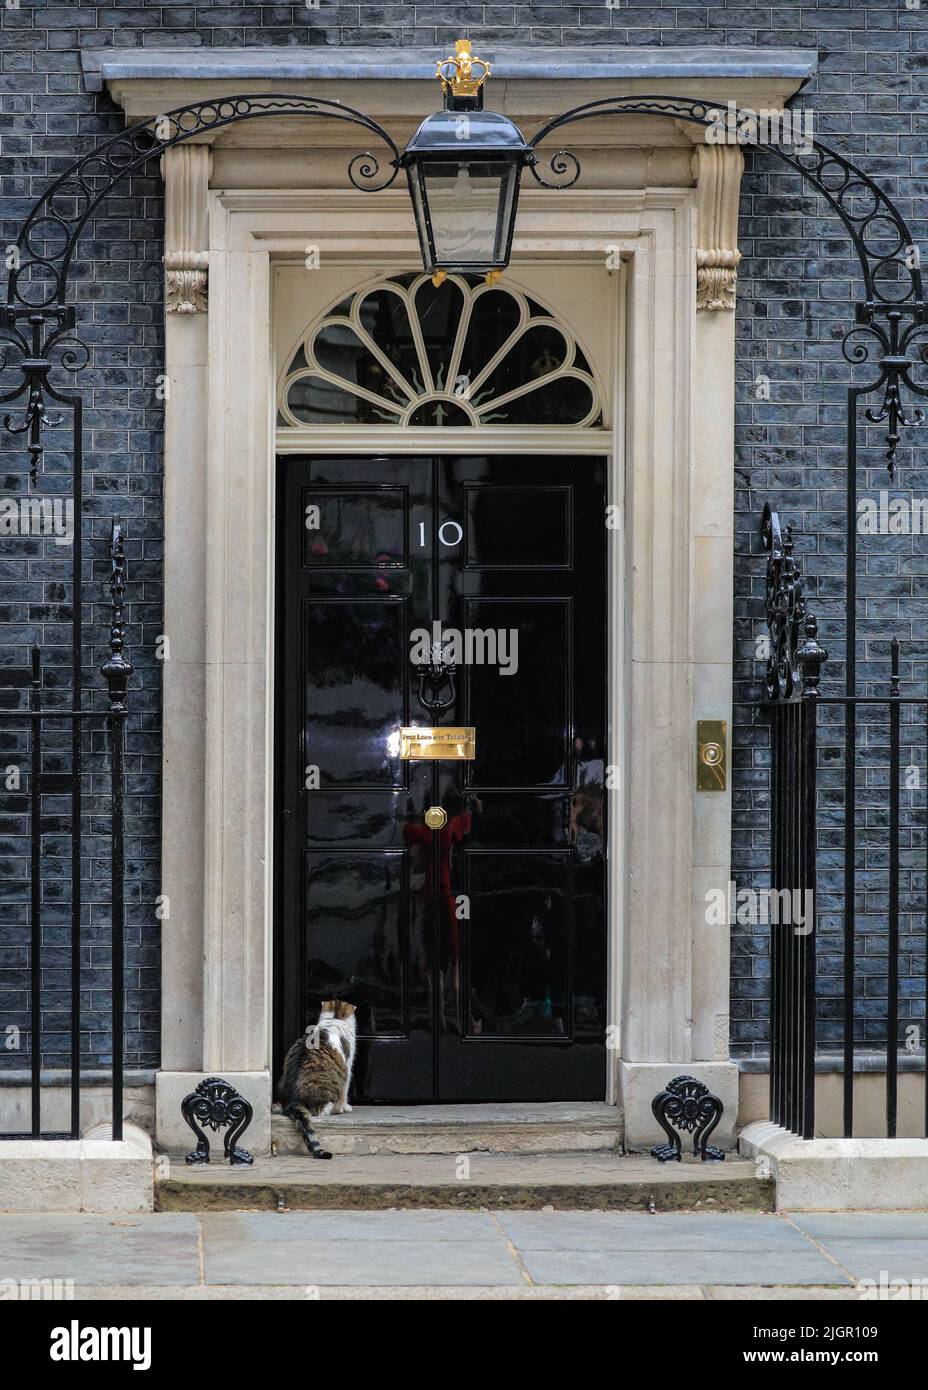 London, UK. 12th July, 2022. Larry the Cat, chief mouser and resident feline at 10 Downing Street, lazily rolls around and snoozes on the pavement outside 10 Downing Street in hot temperatures above 30 degrees in Westminster, occasionally checking out his own reflection in the iconic black door. Despite the ongoing political crisis and leadership contest, the famous cat seems to take all of the media attention in its stride. Credit: Imageplotter/Alamy Live News Stock Photo